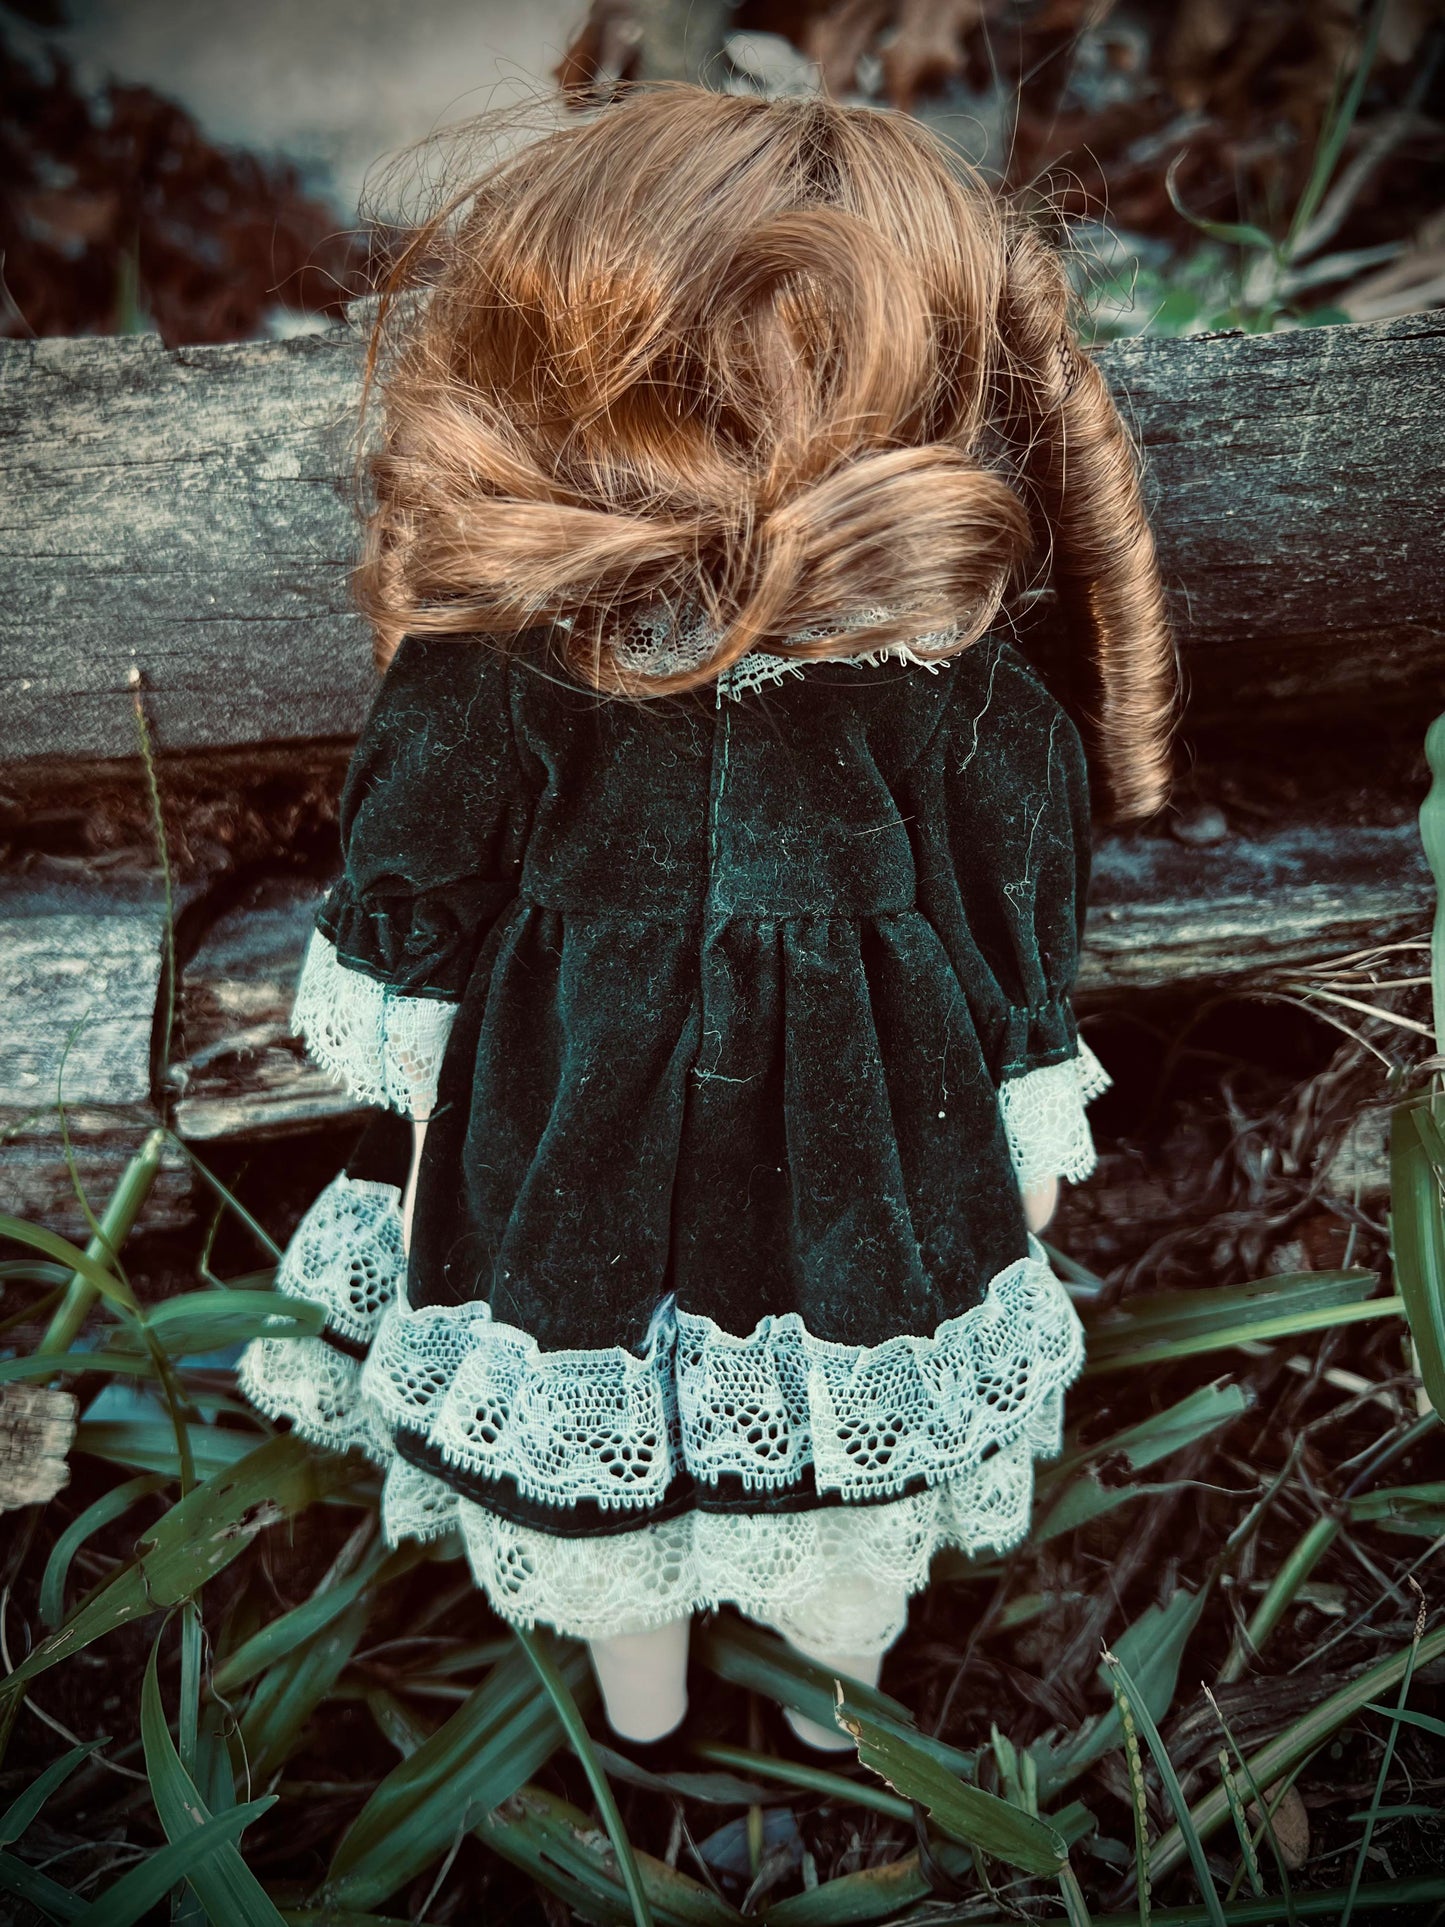 Meet Mildred 8" Mini Haunt Doll Porcelain Creepy Haunted Spirit Infected Scary Poltergeist Spooky Zombie Possessed Gothic Positive Energy